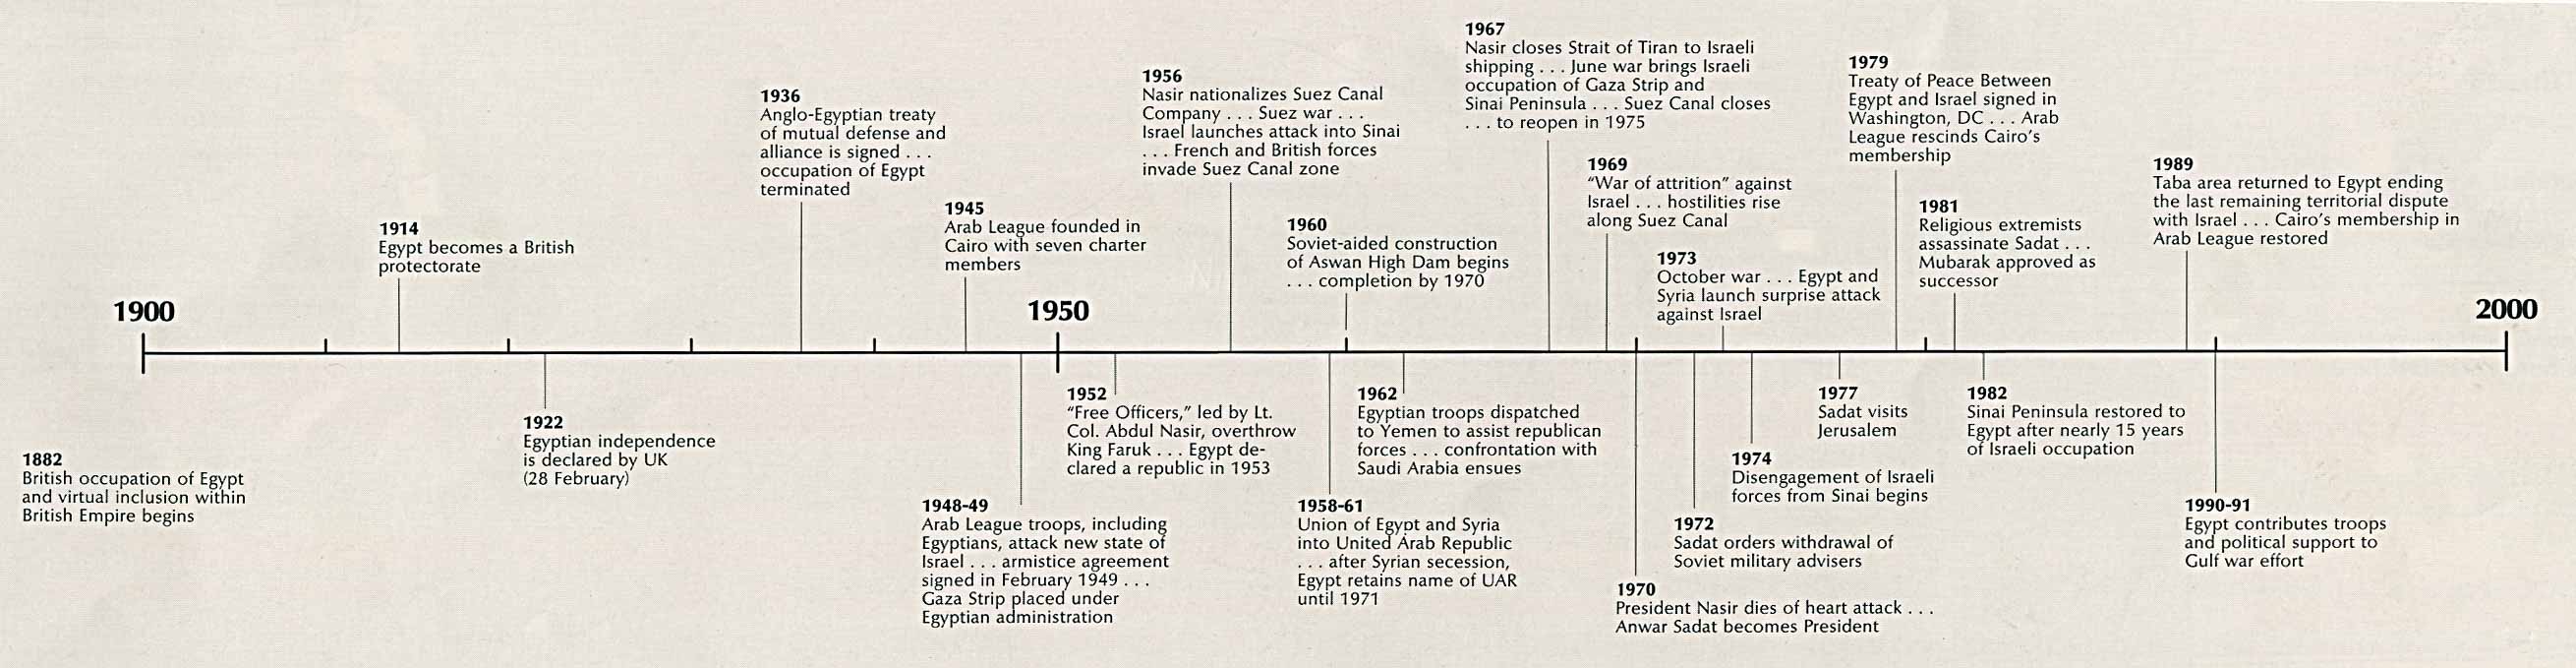 architecture history  timeline